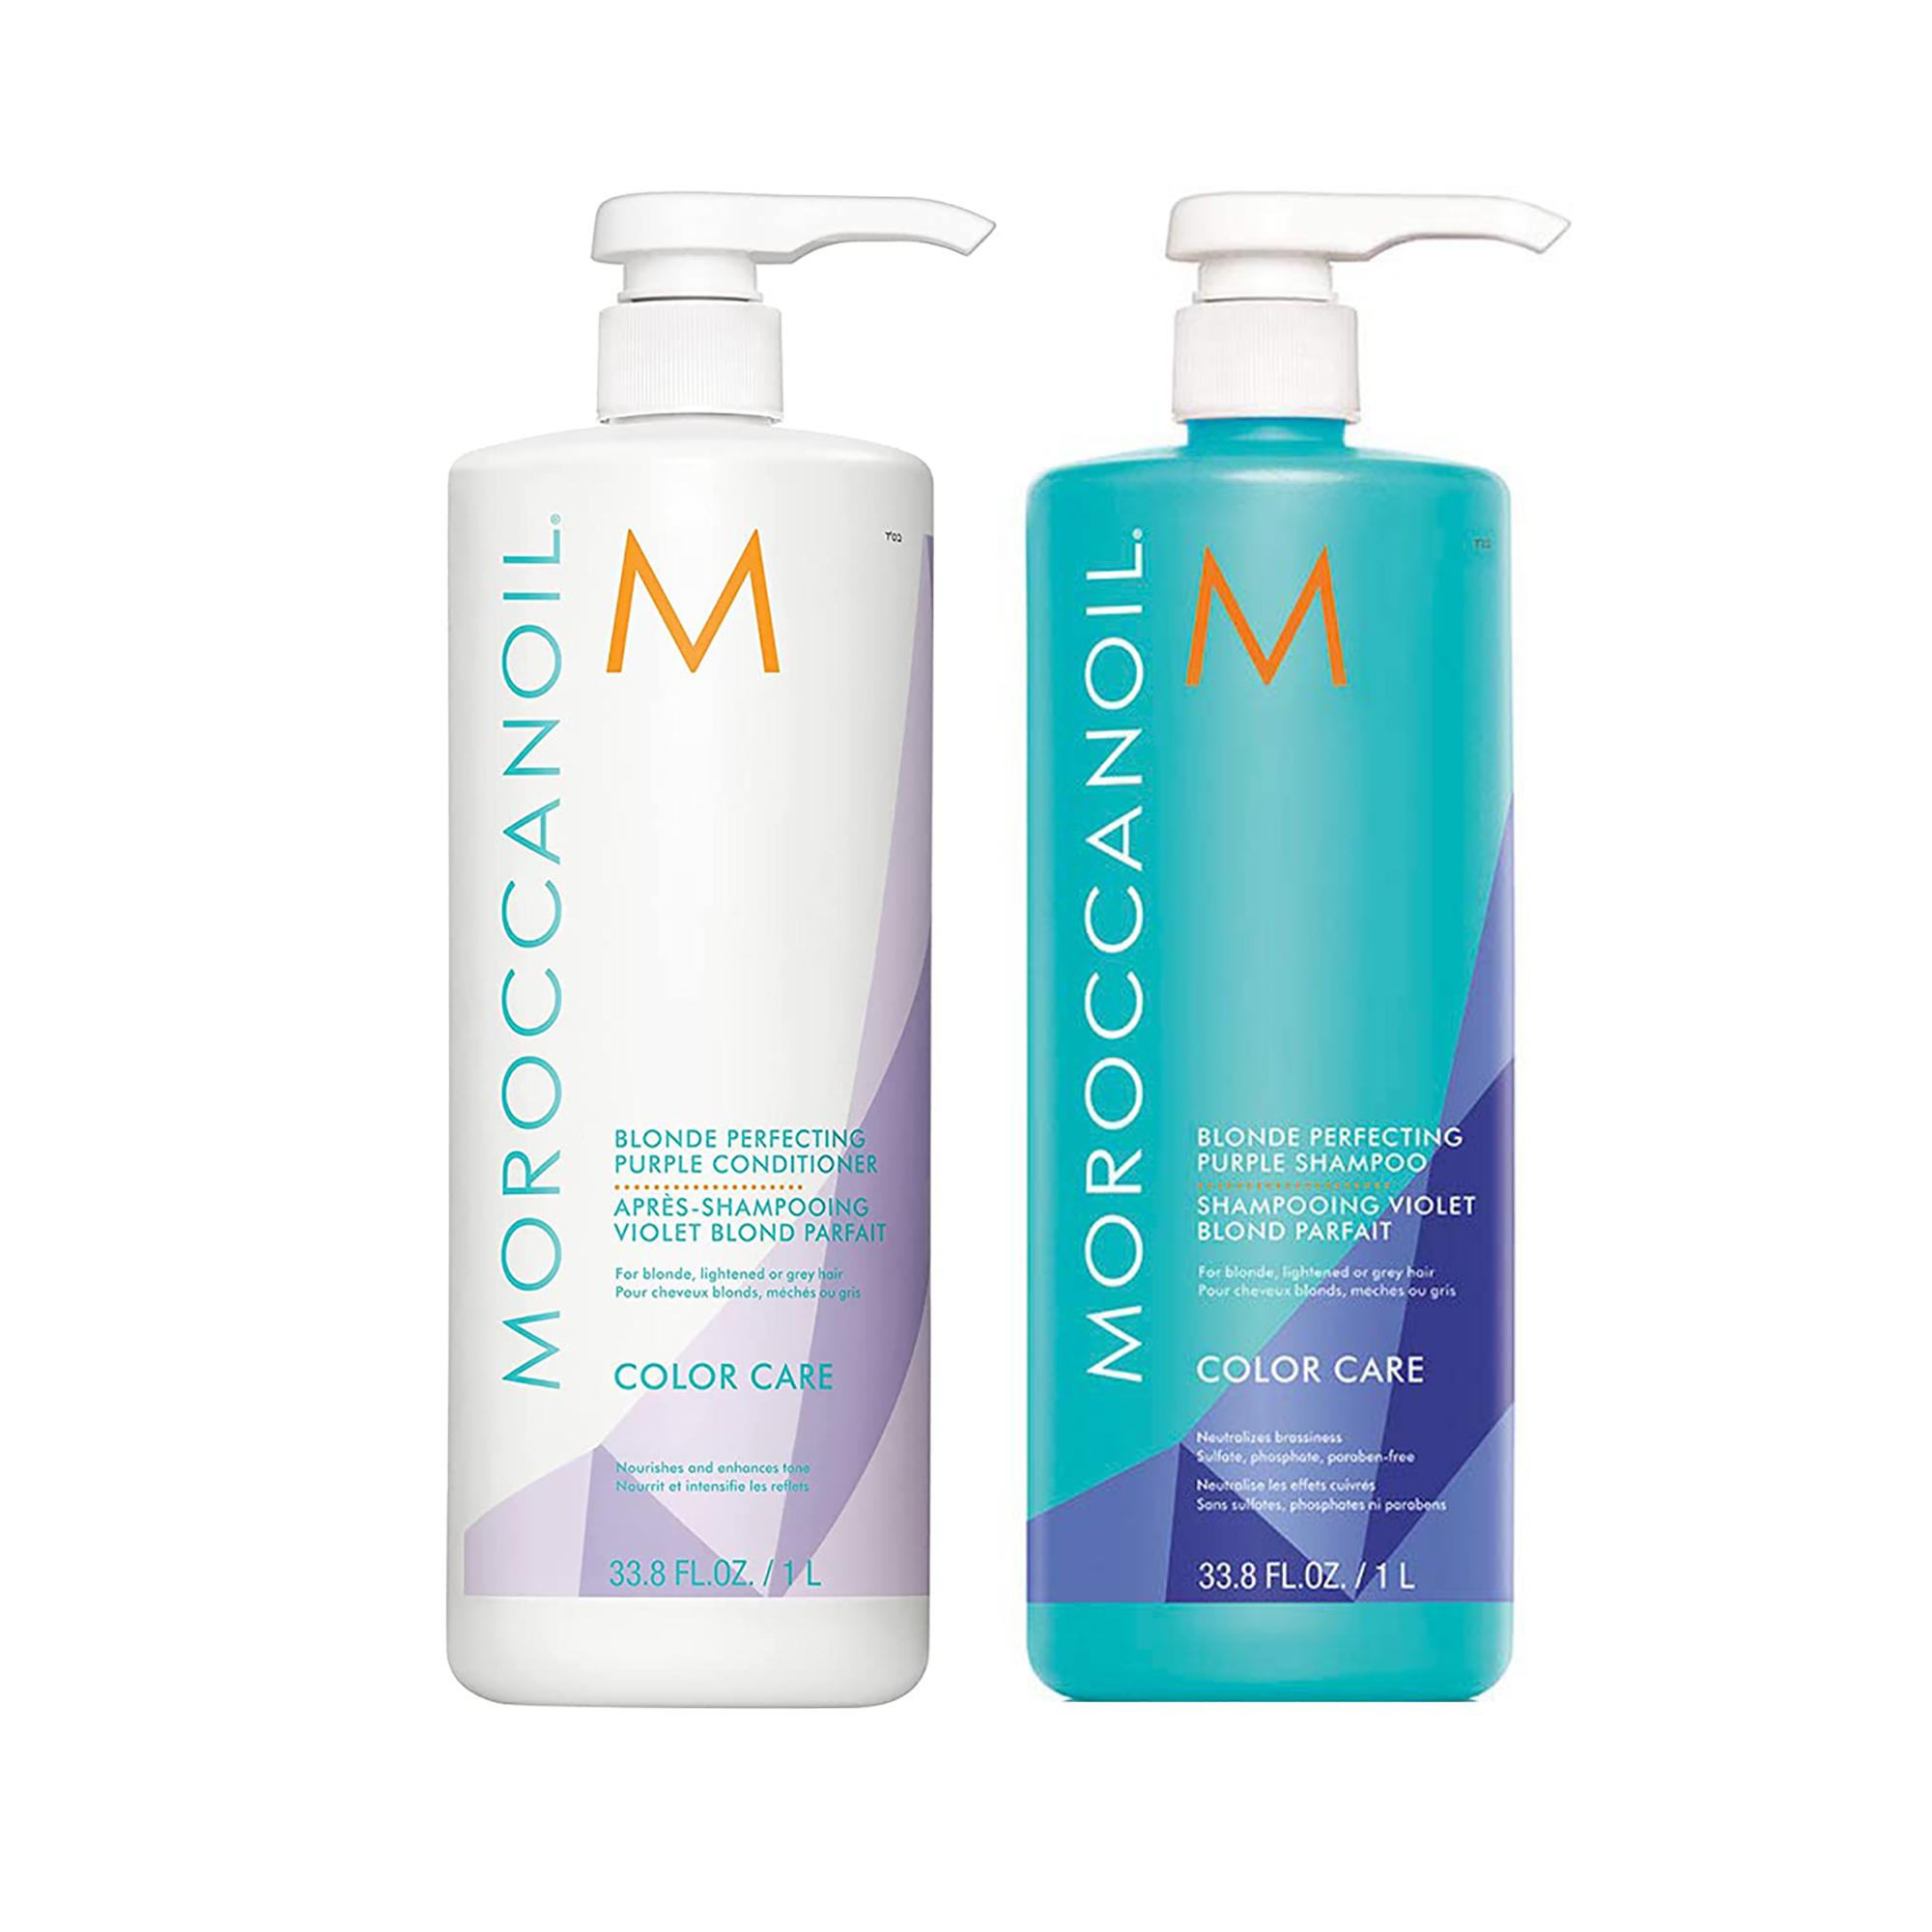 MoroccanOil Blonde Perfecting Shampoo and Conditioner - Planet Beauty